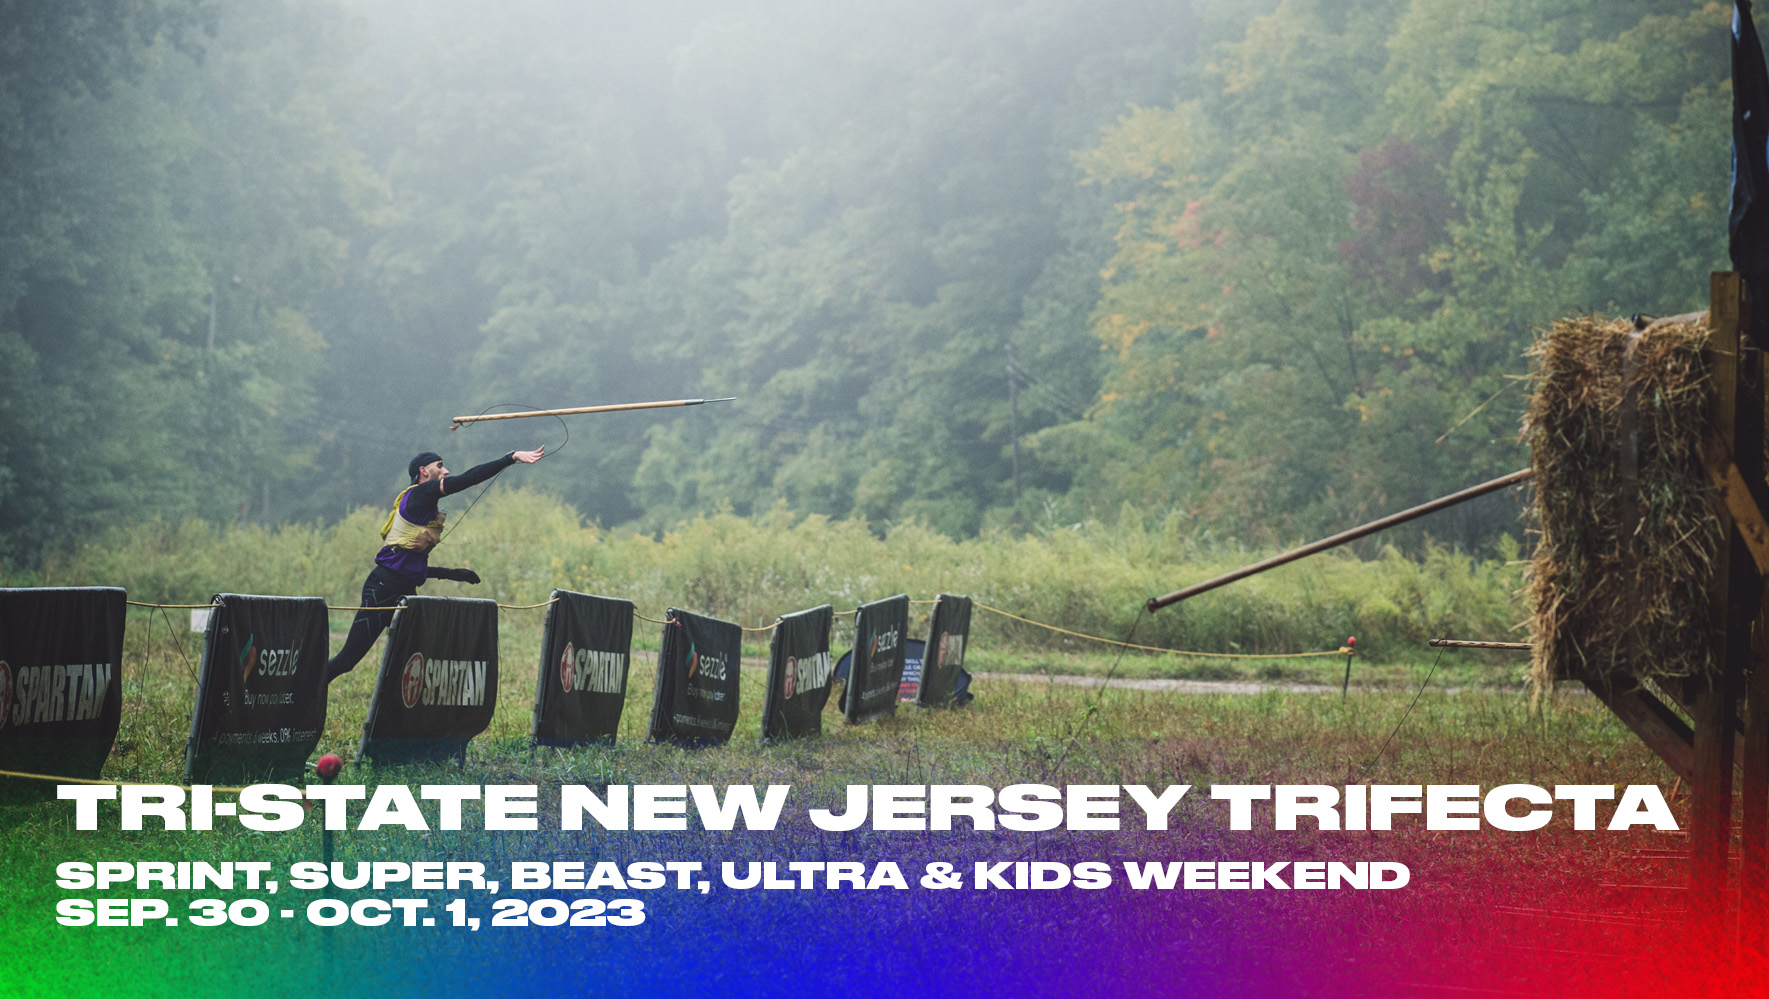 Tri-State New Jersey Spartan Trifecta Weekend 2023 - Sprint, Super, Beast,  Ultra and Kids, Vernon Township, NJ